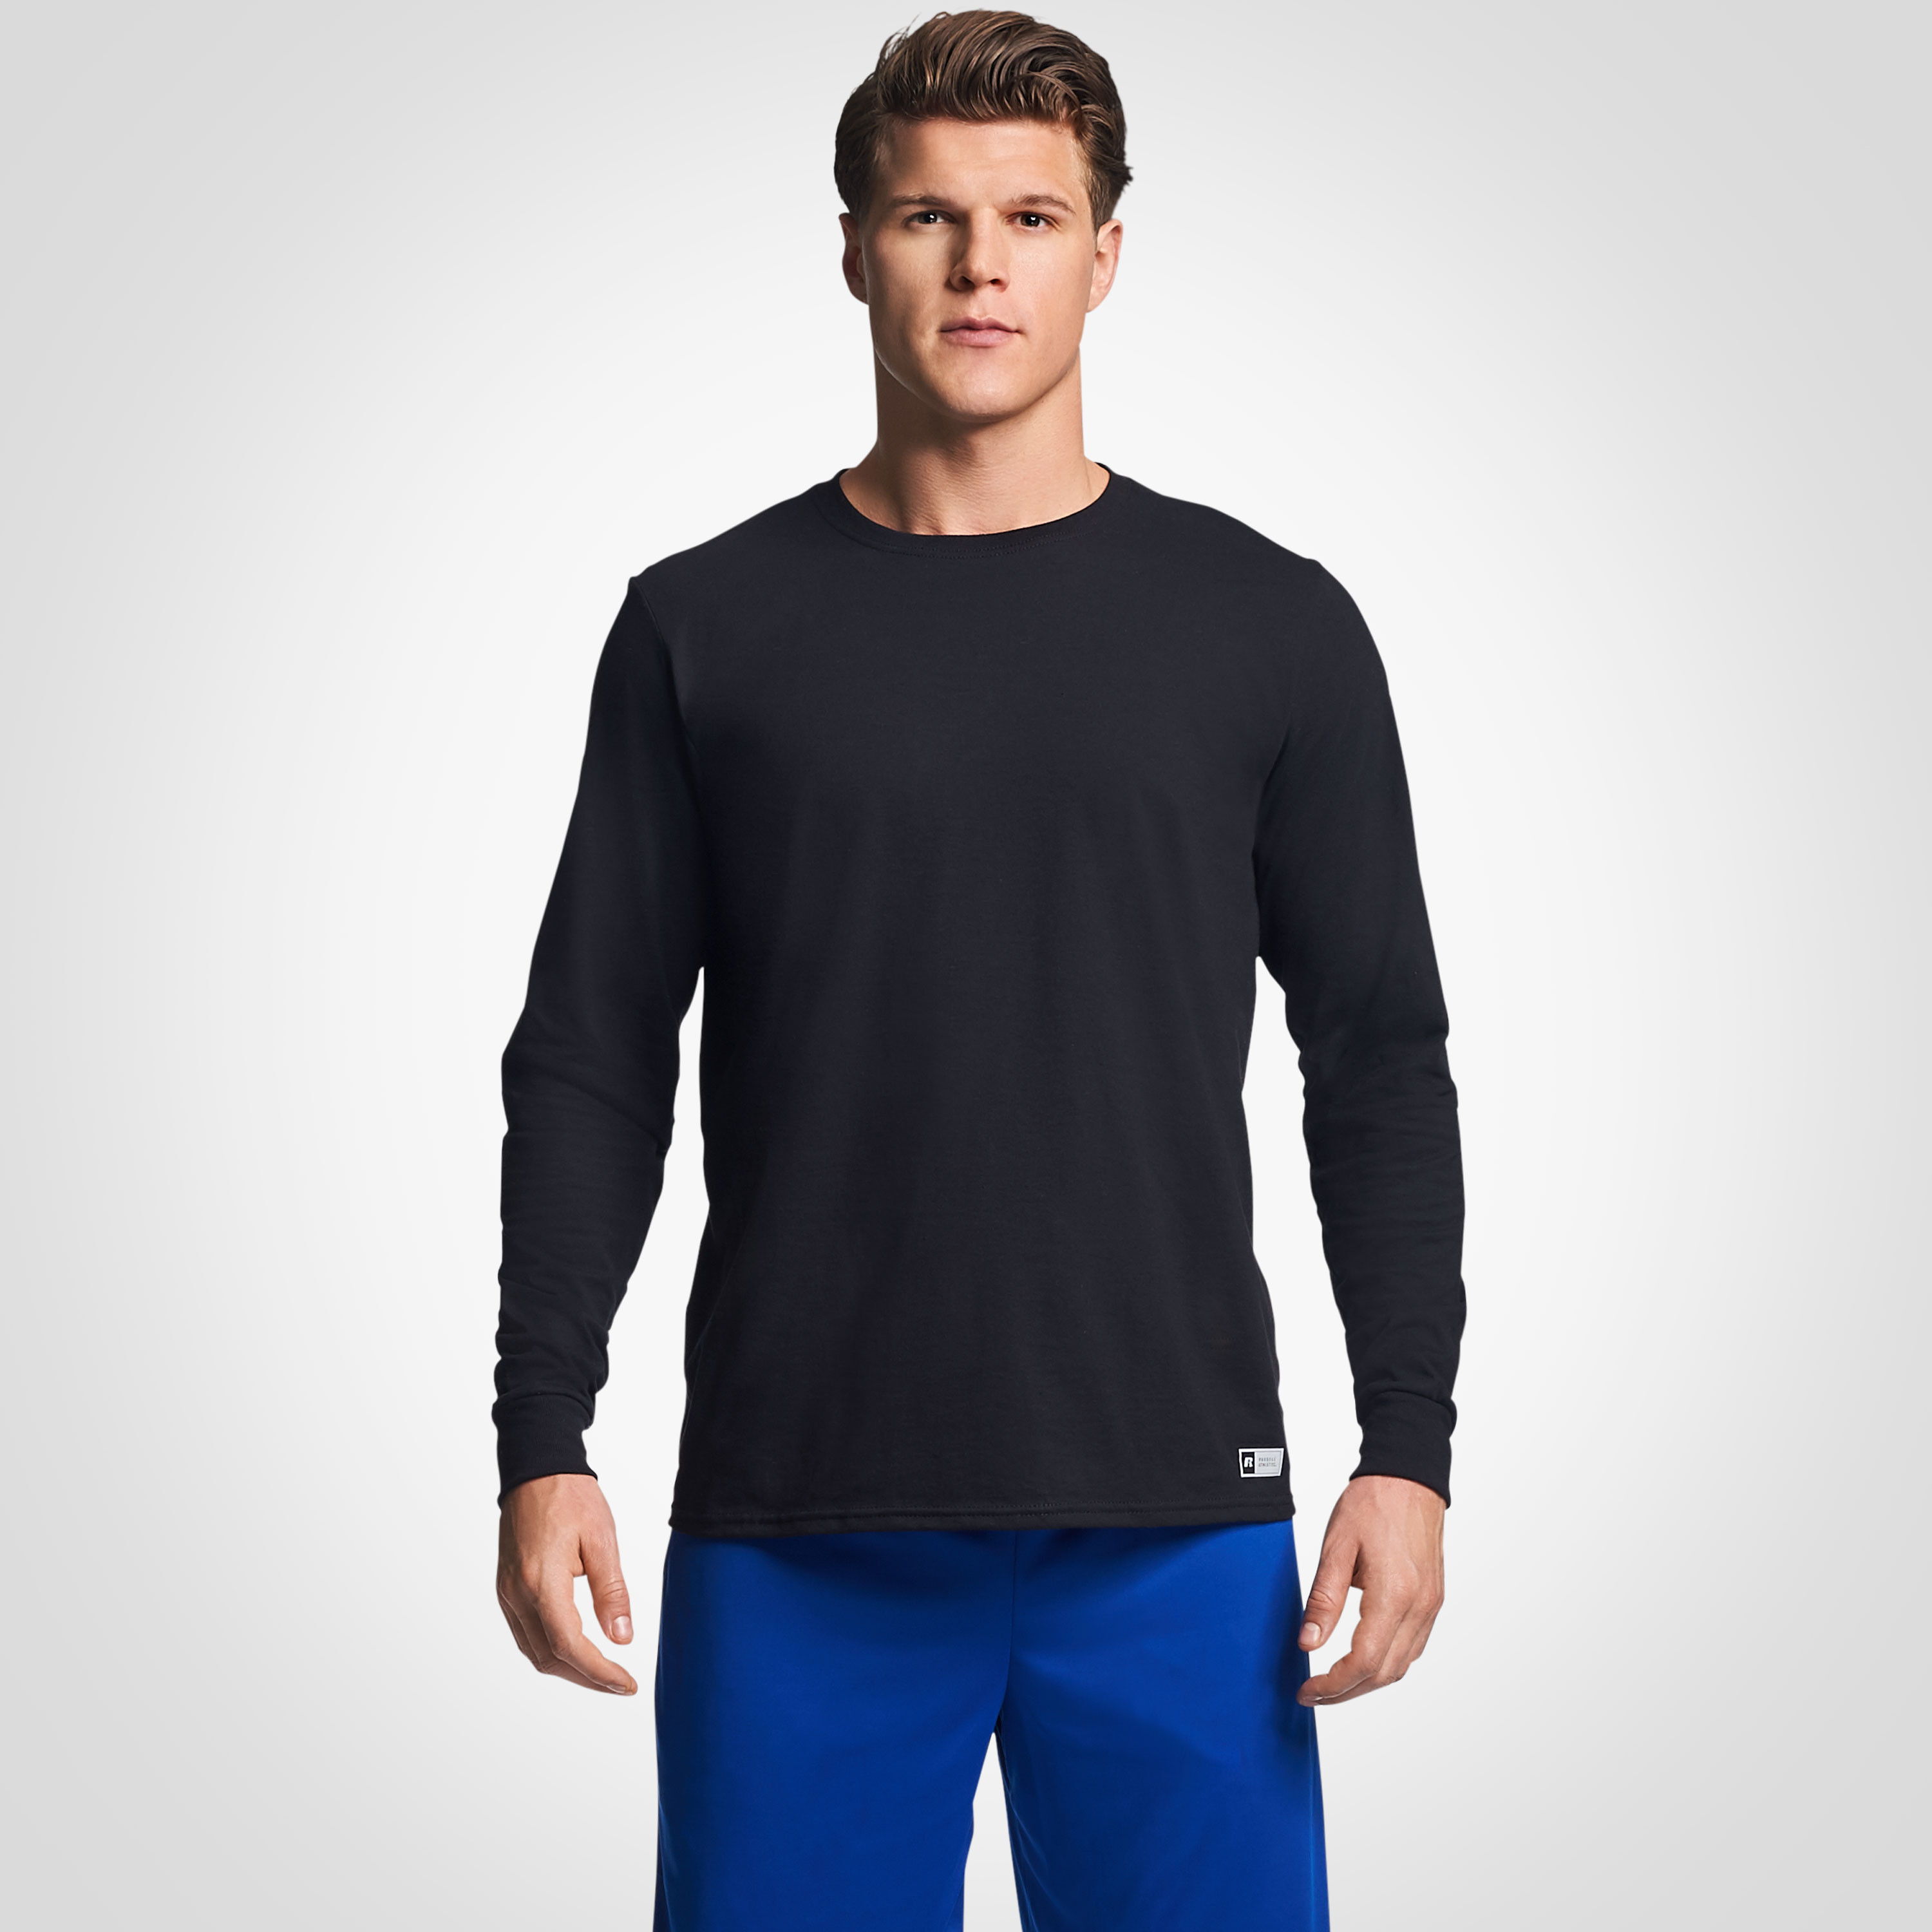 russell long sleeve compression shirt